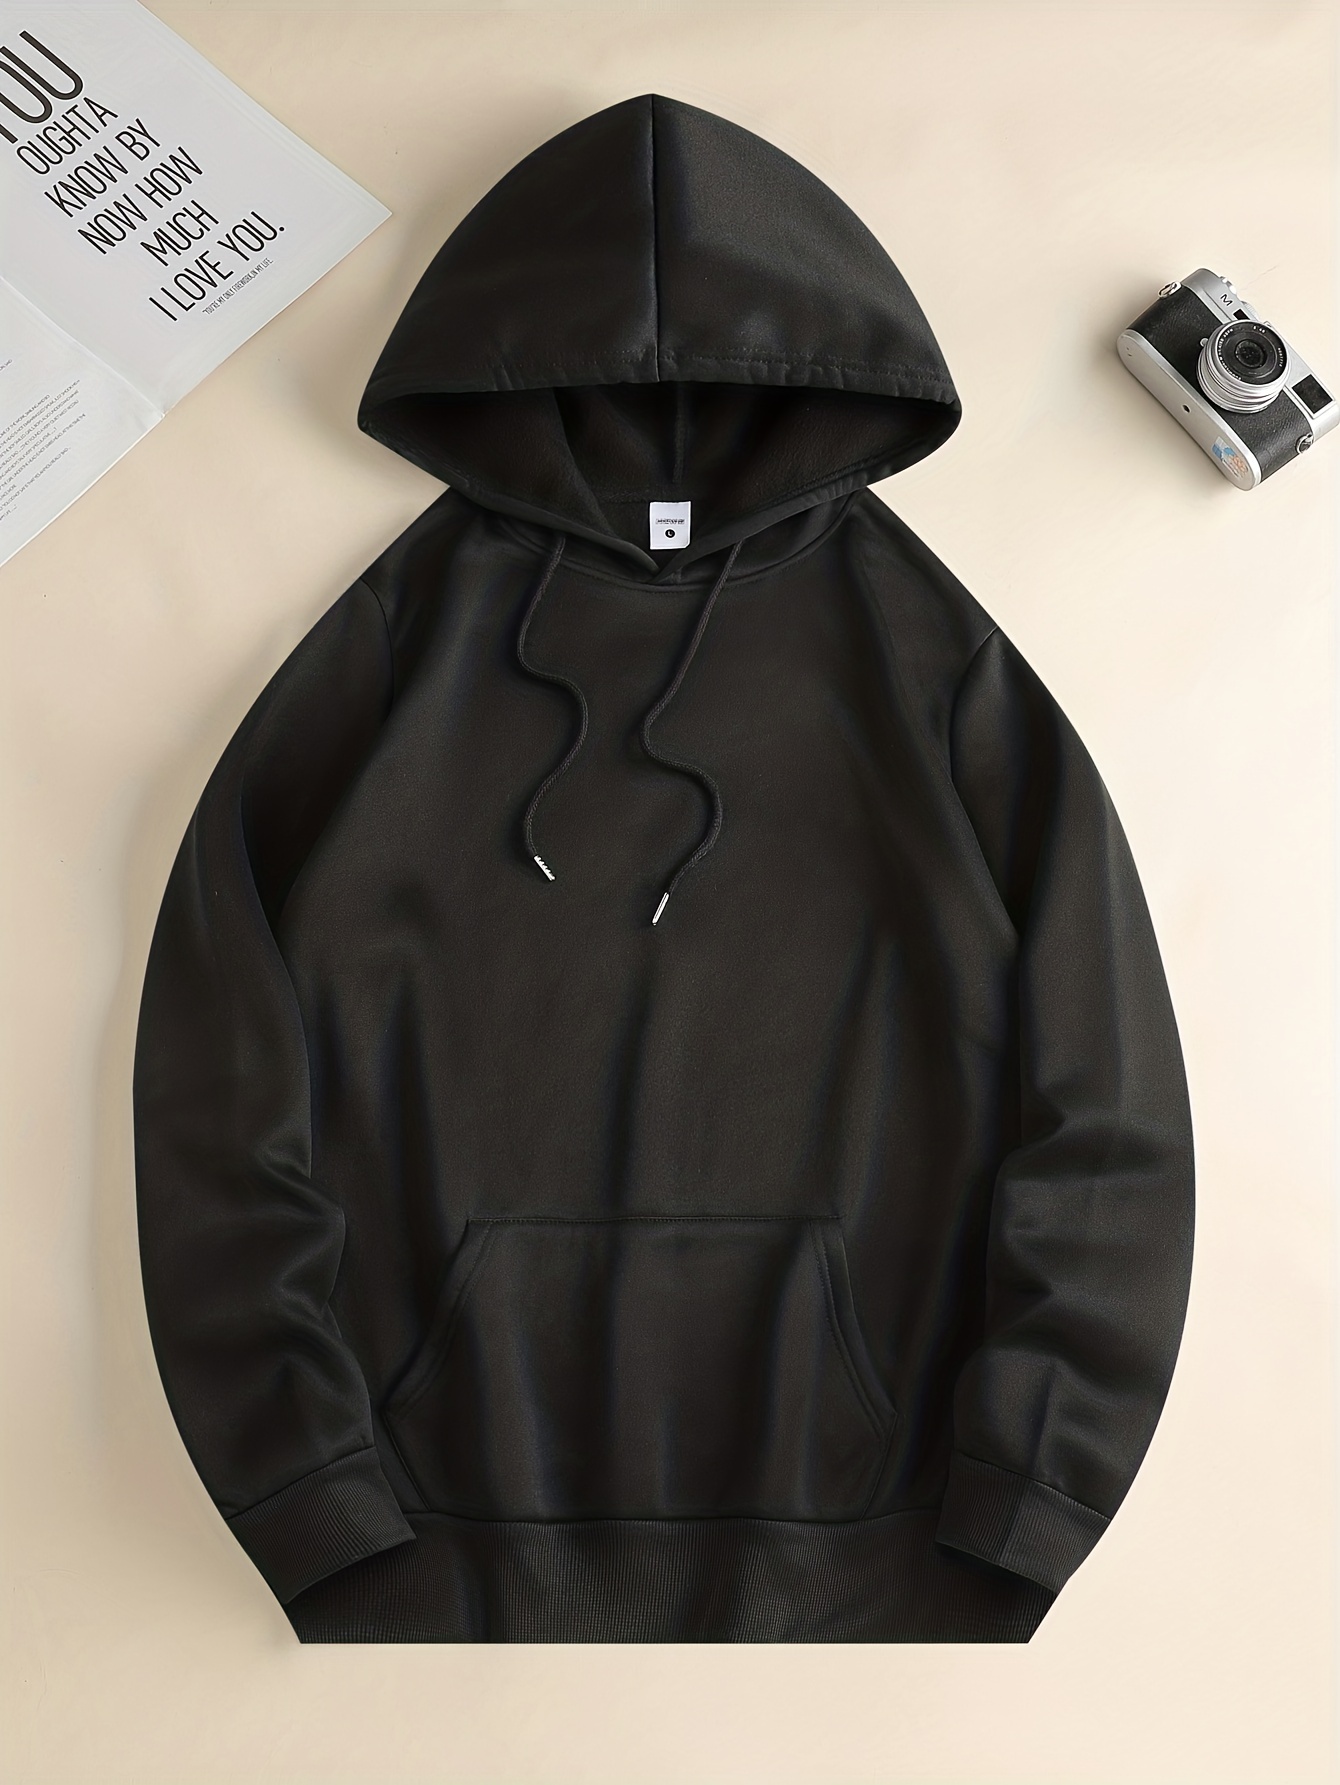 solid color hoodies for men hoodie with kangaroo pocket comfy loose trendy hooded pullover mens clothing for autumn winter details 27